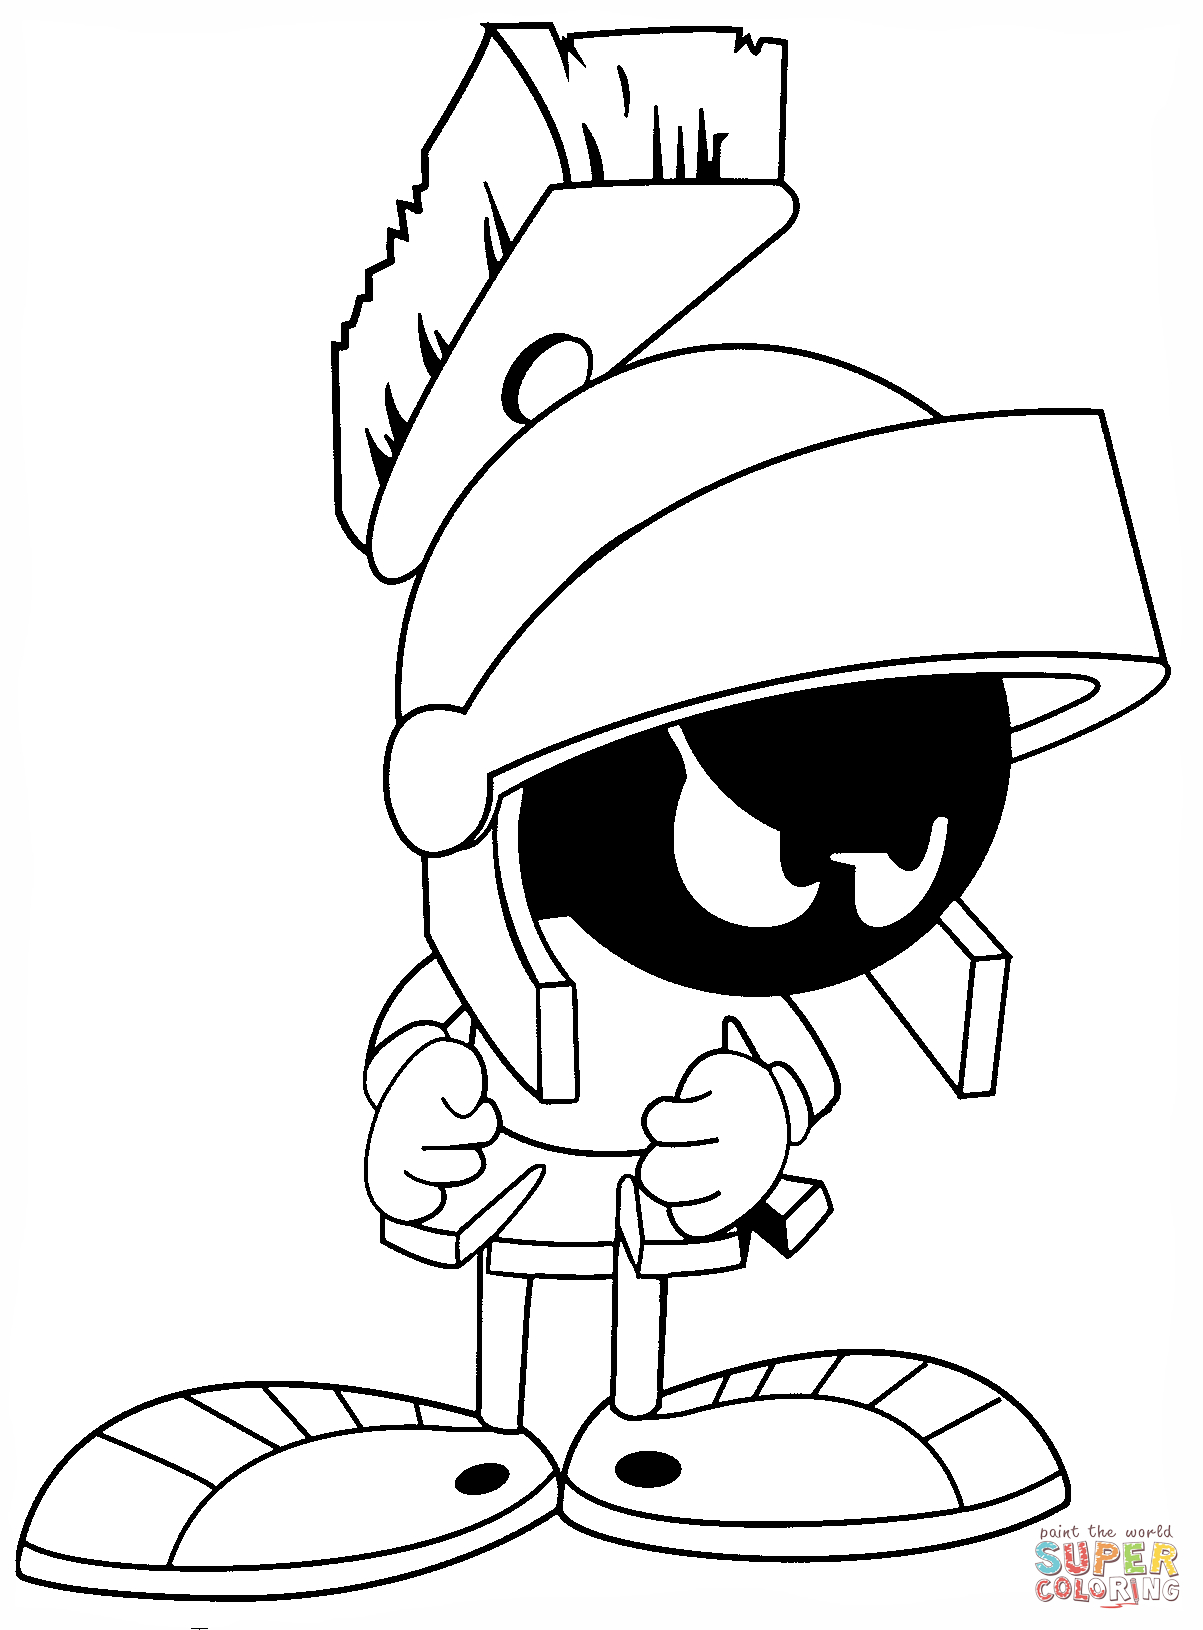 Taz Cartoon Coloring Pages Looney Tunes Coloring Pages Free Coloring Pages